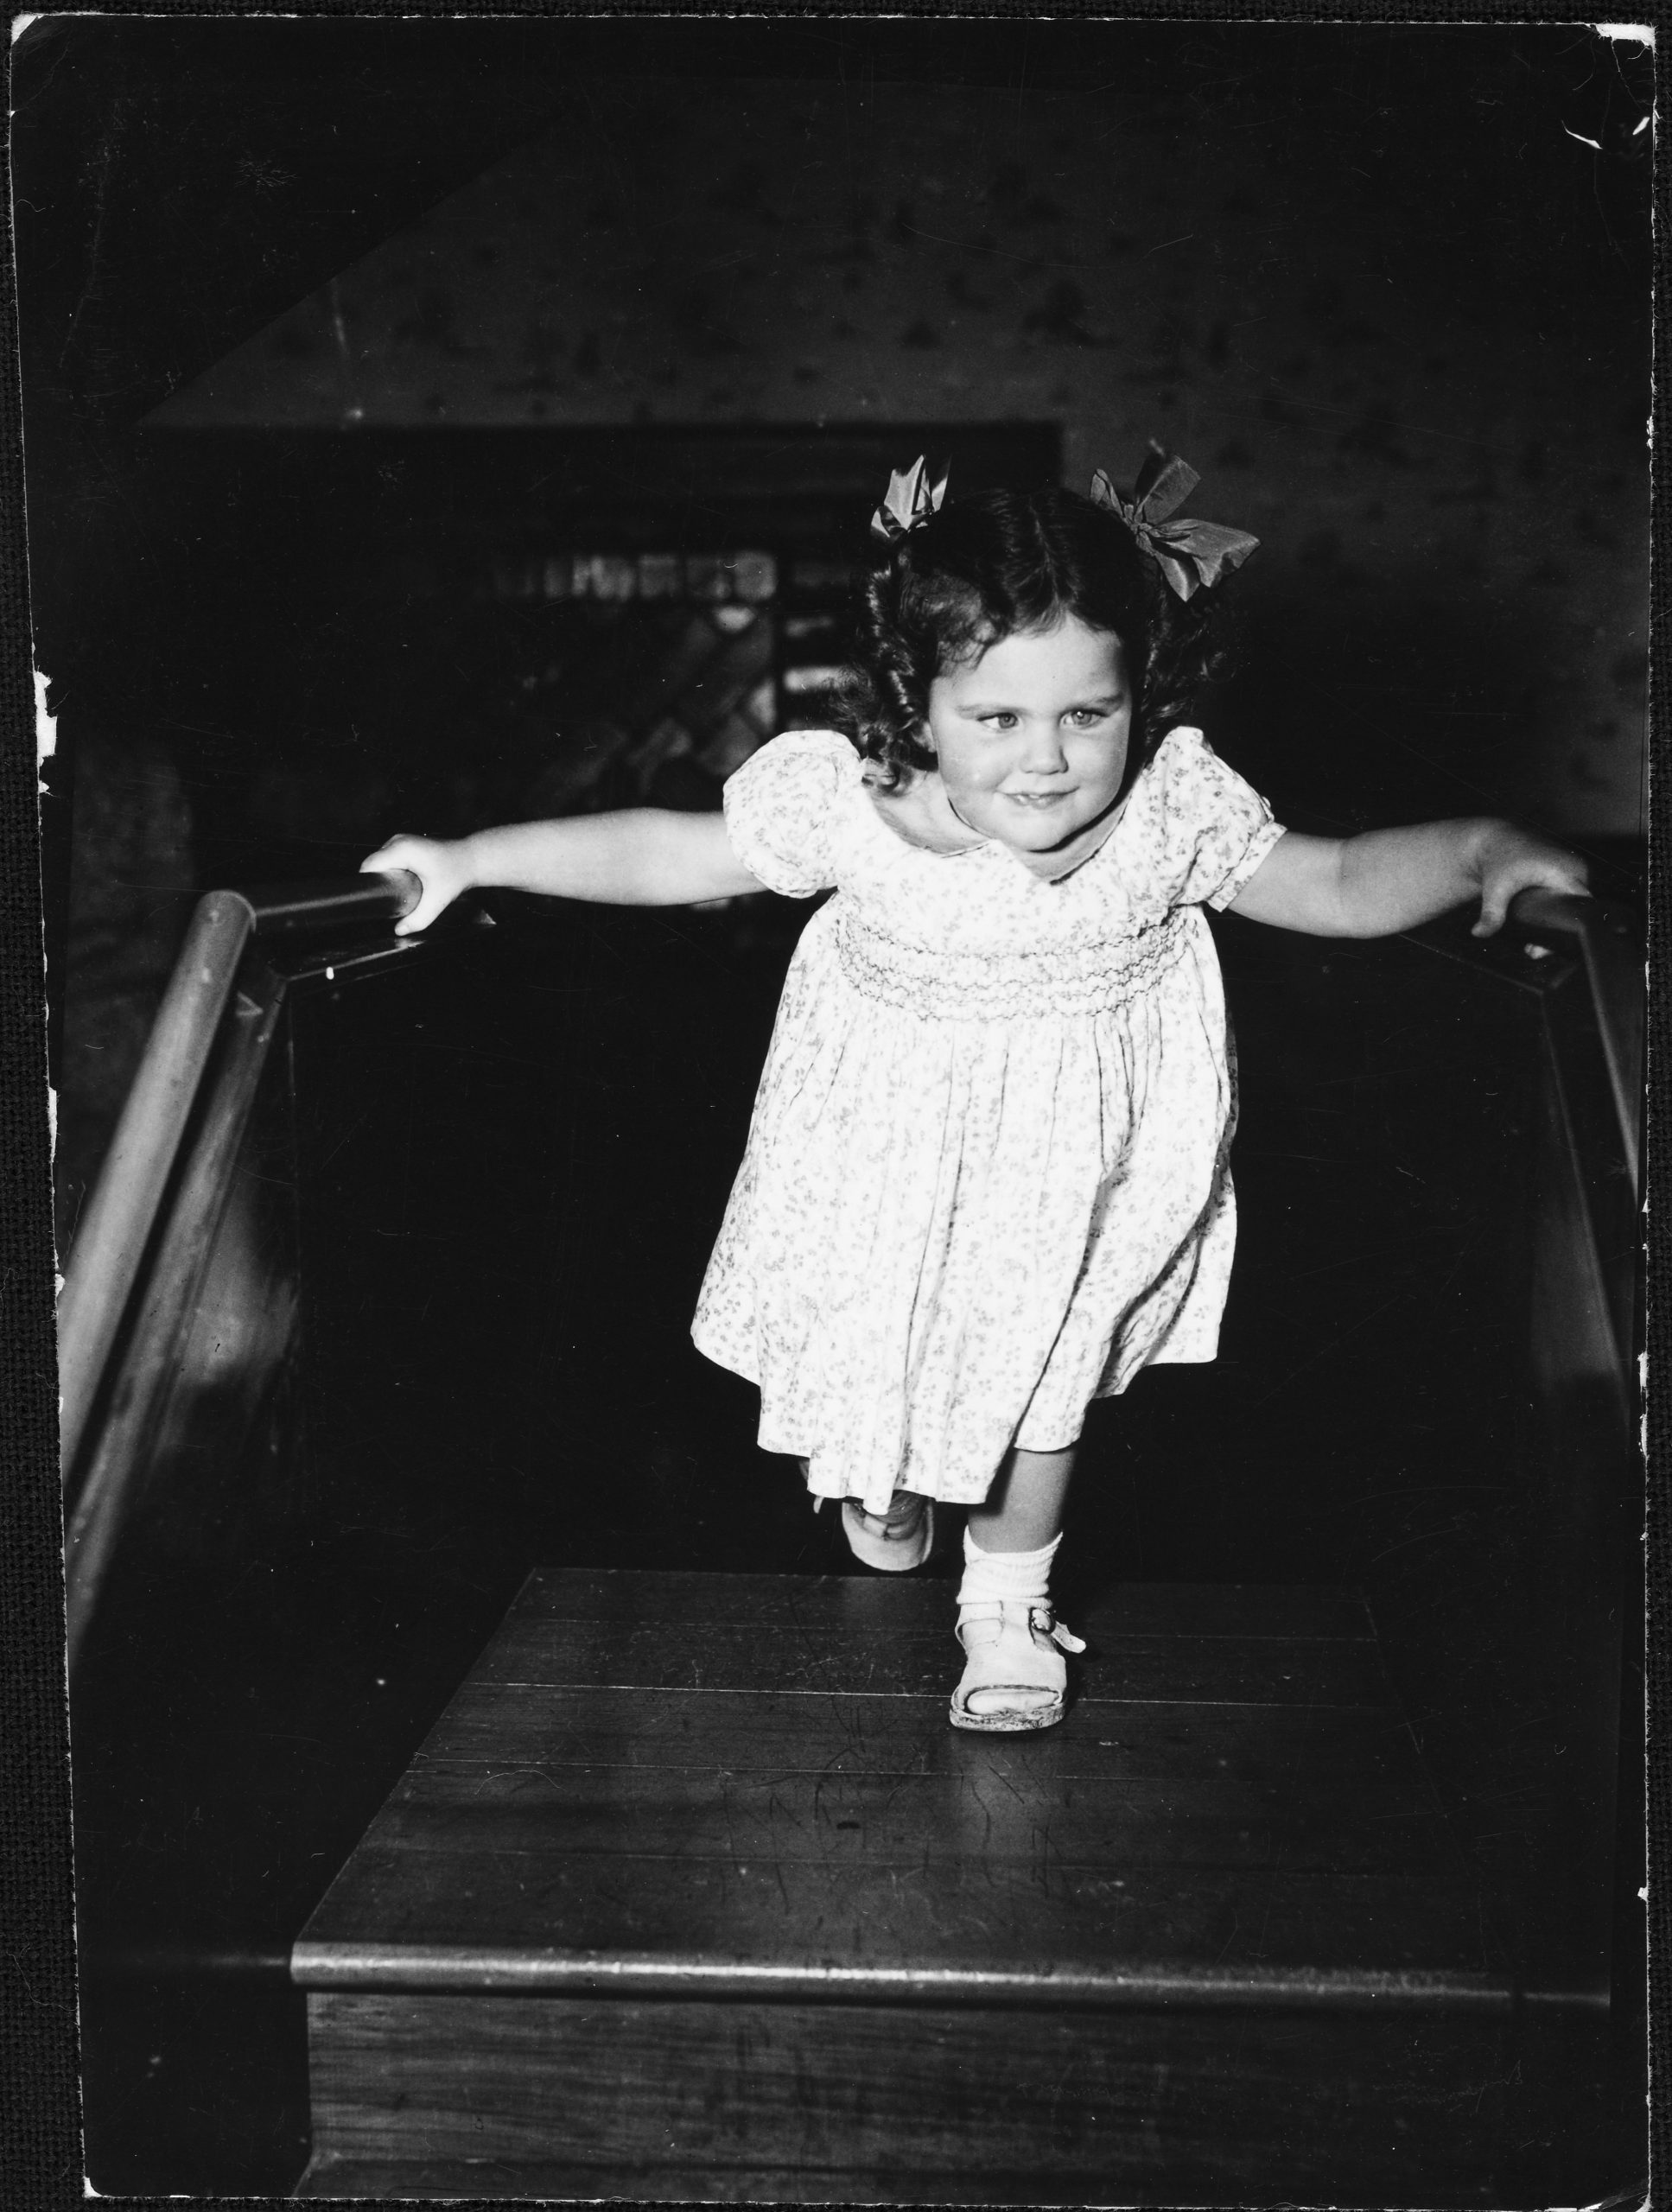 Lesley aged about four climbing the practice stairs in the play room at Sunrise home